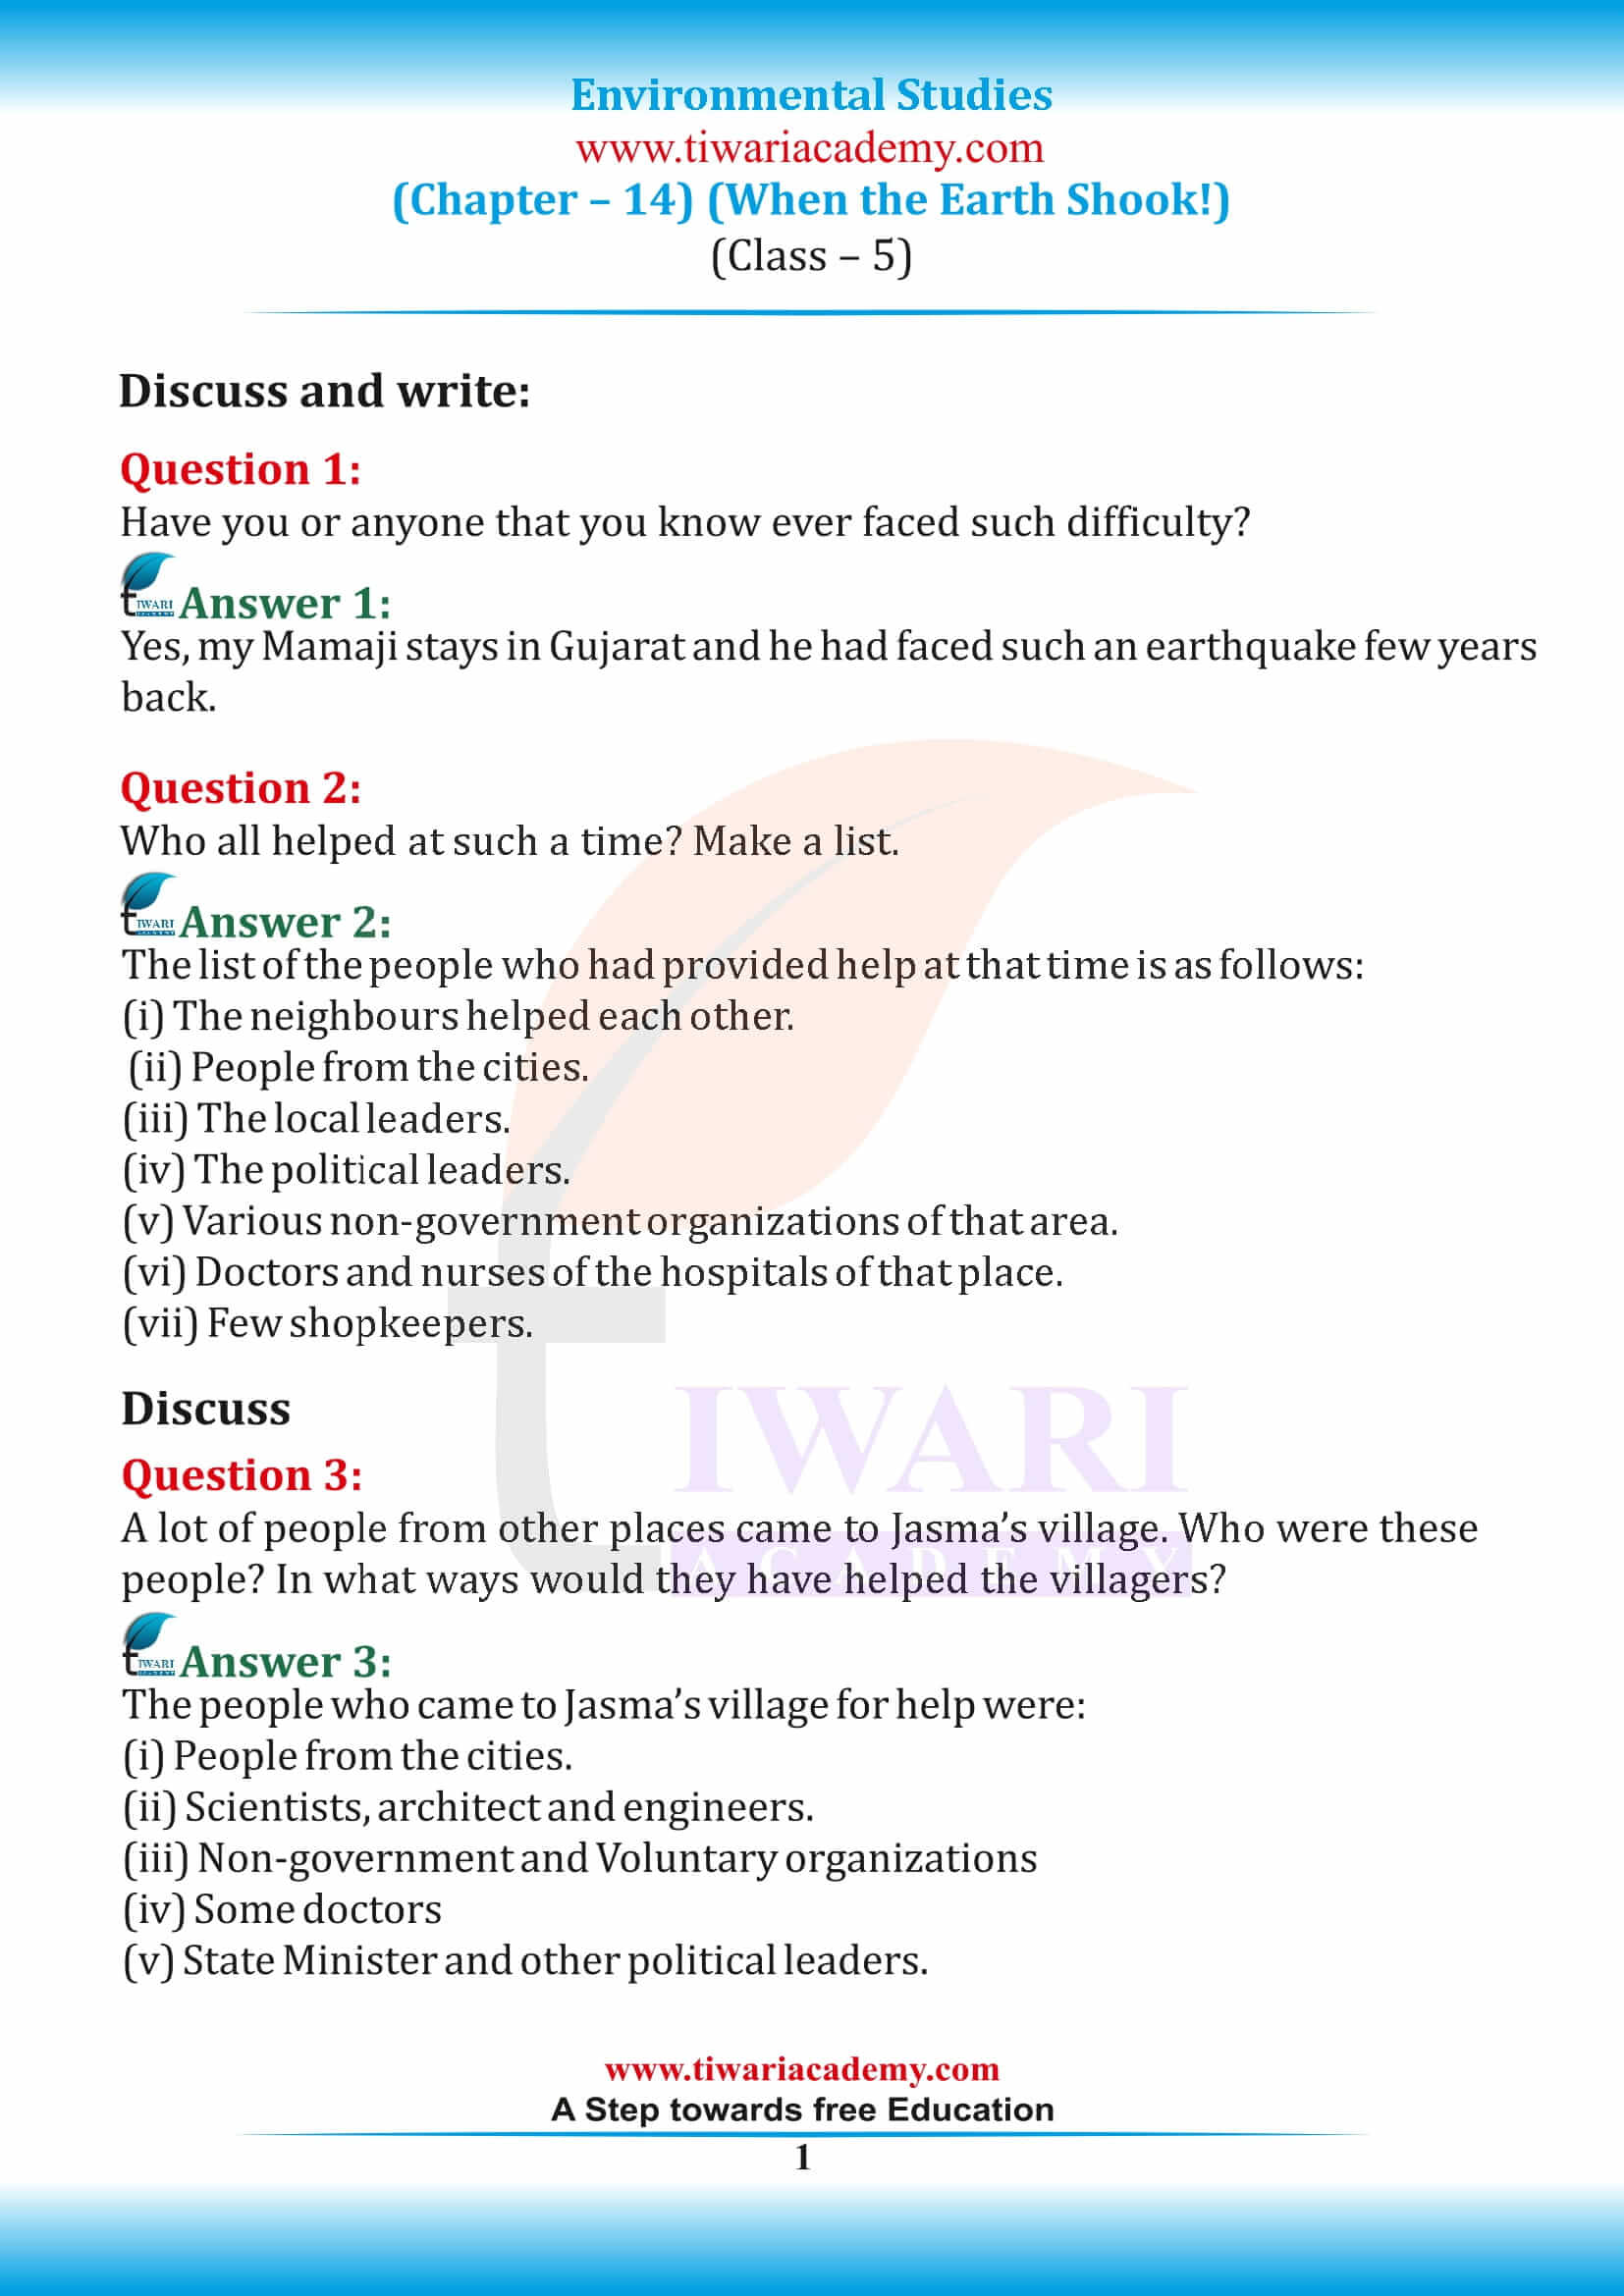 NCERT Solutions for Class 5 EVS Chapter 14 When the Earth Shook